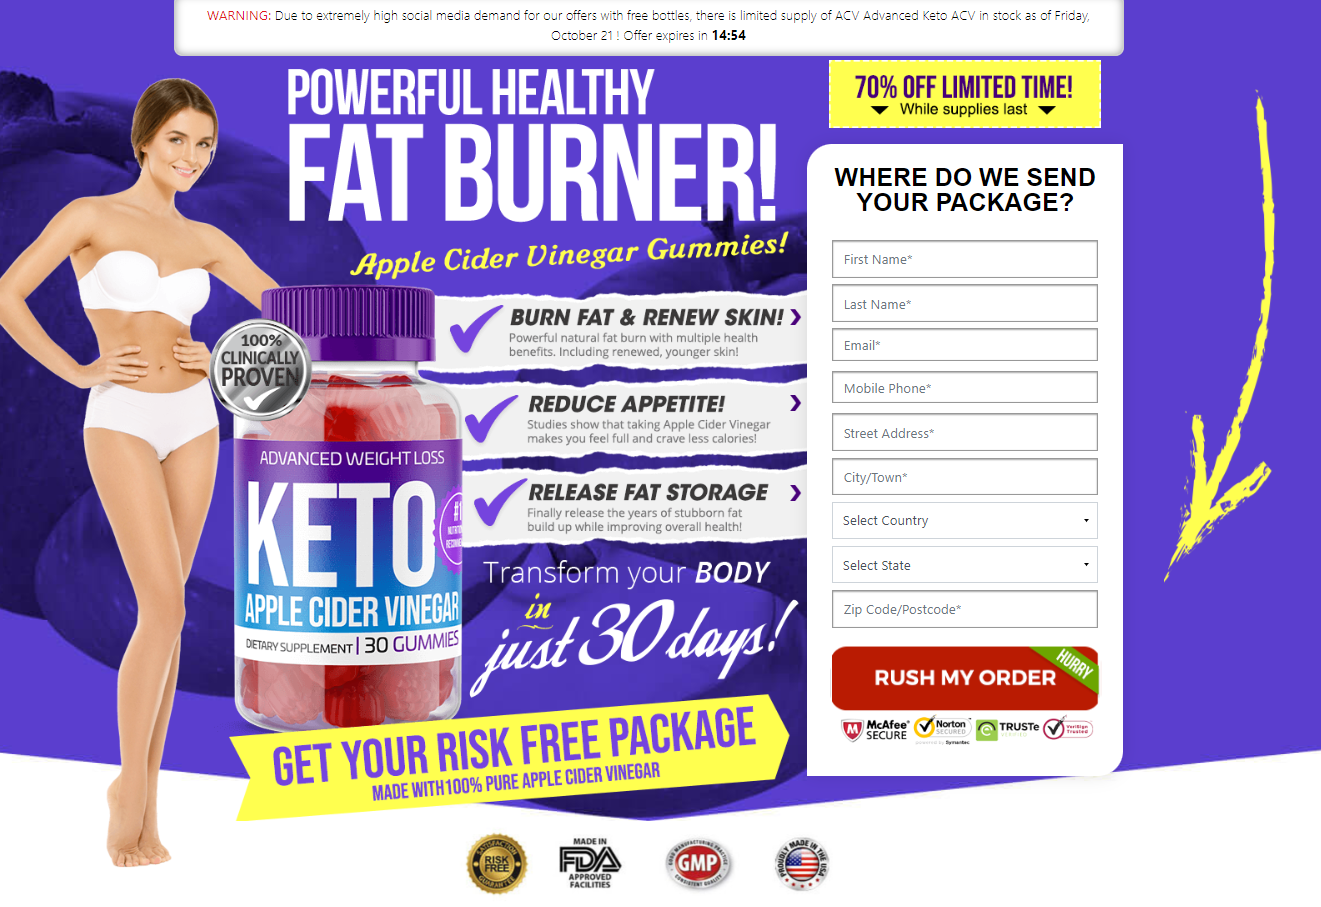 Divinity Labs Keto Gummies: (Reviews Truth) Fake Weight Loss, Supplement or Real Results?